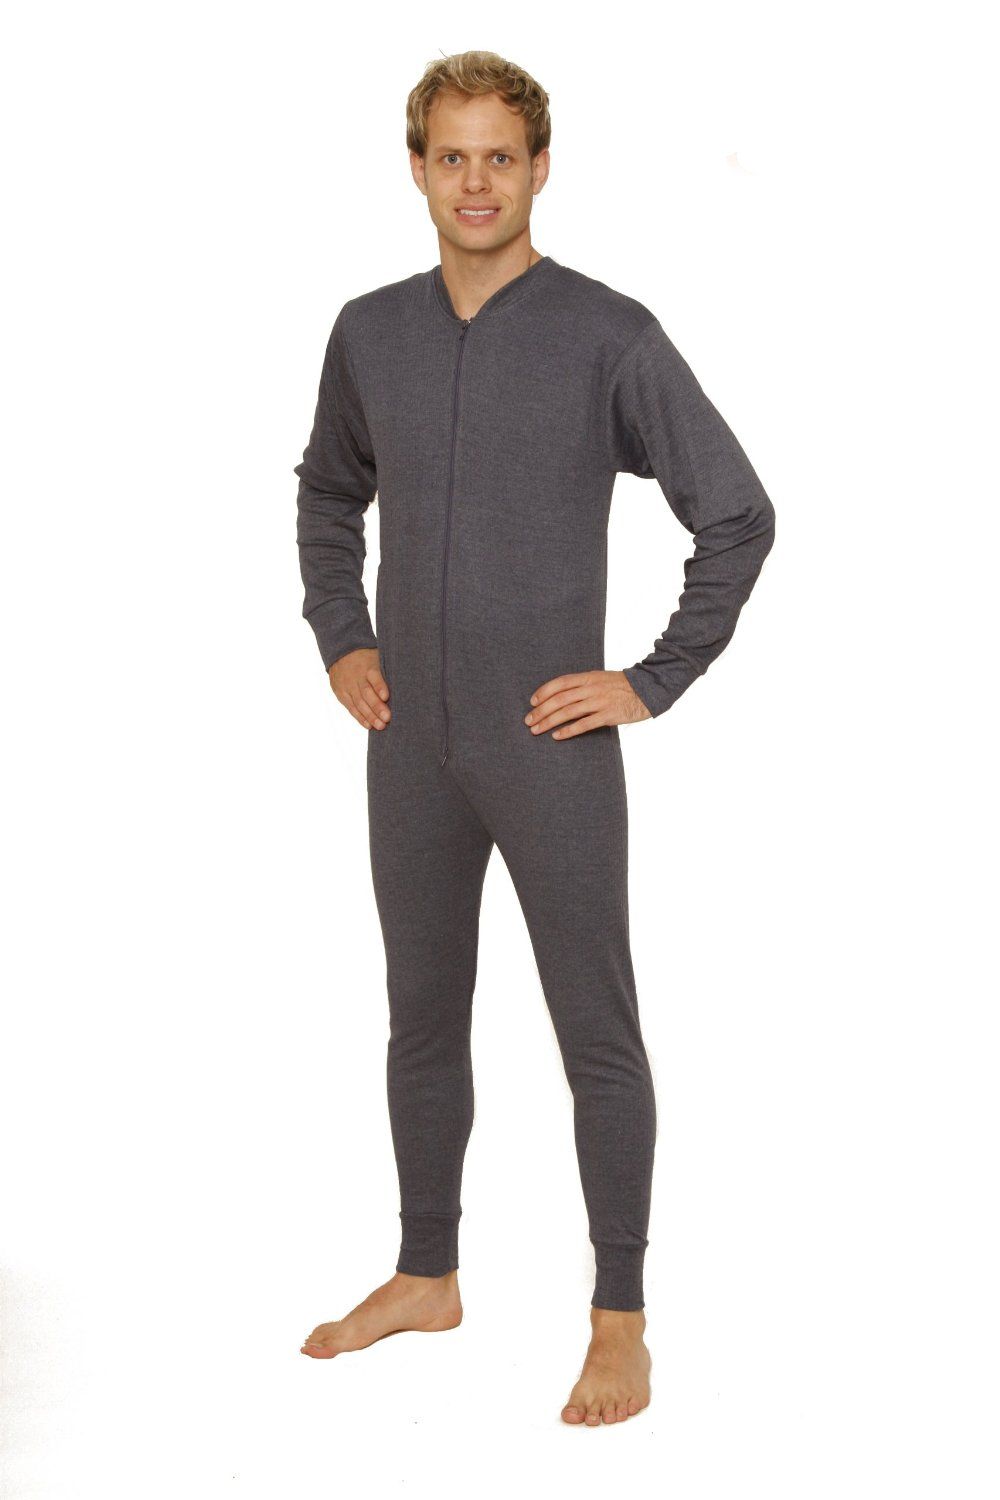 Octave® Thermal Baselayers Mens All in One Thermal Underwear Union 